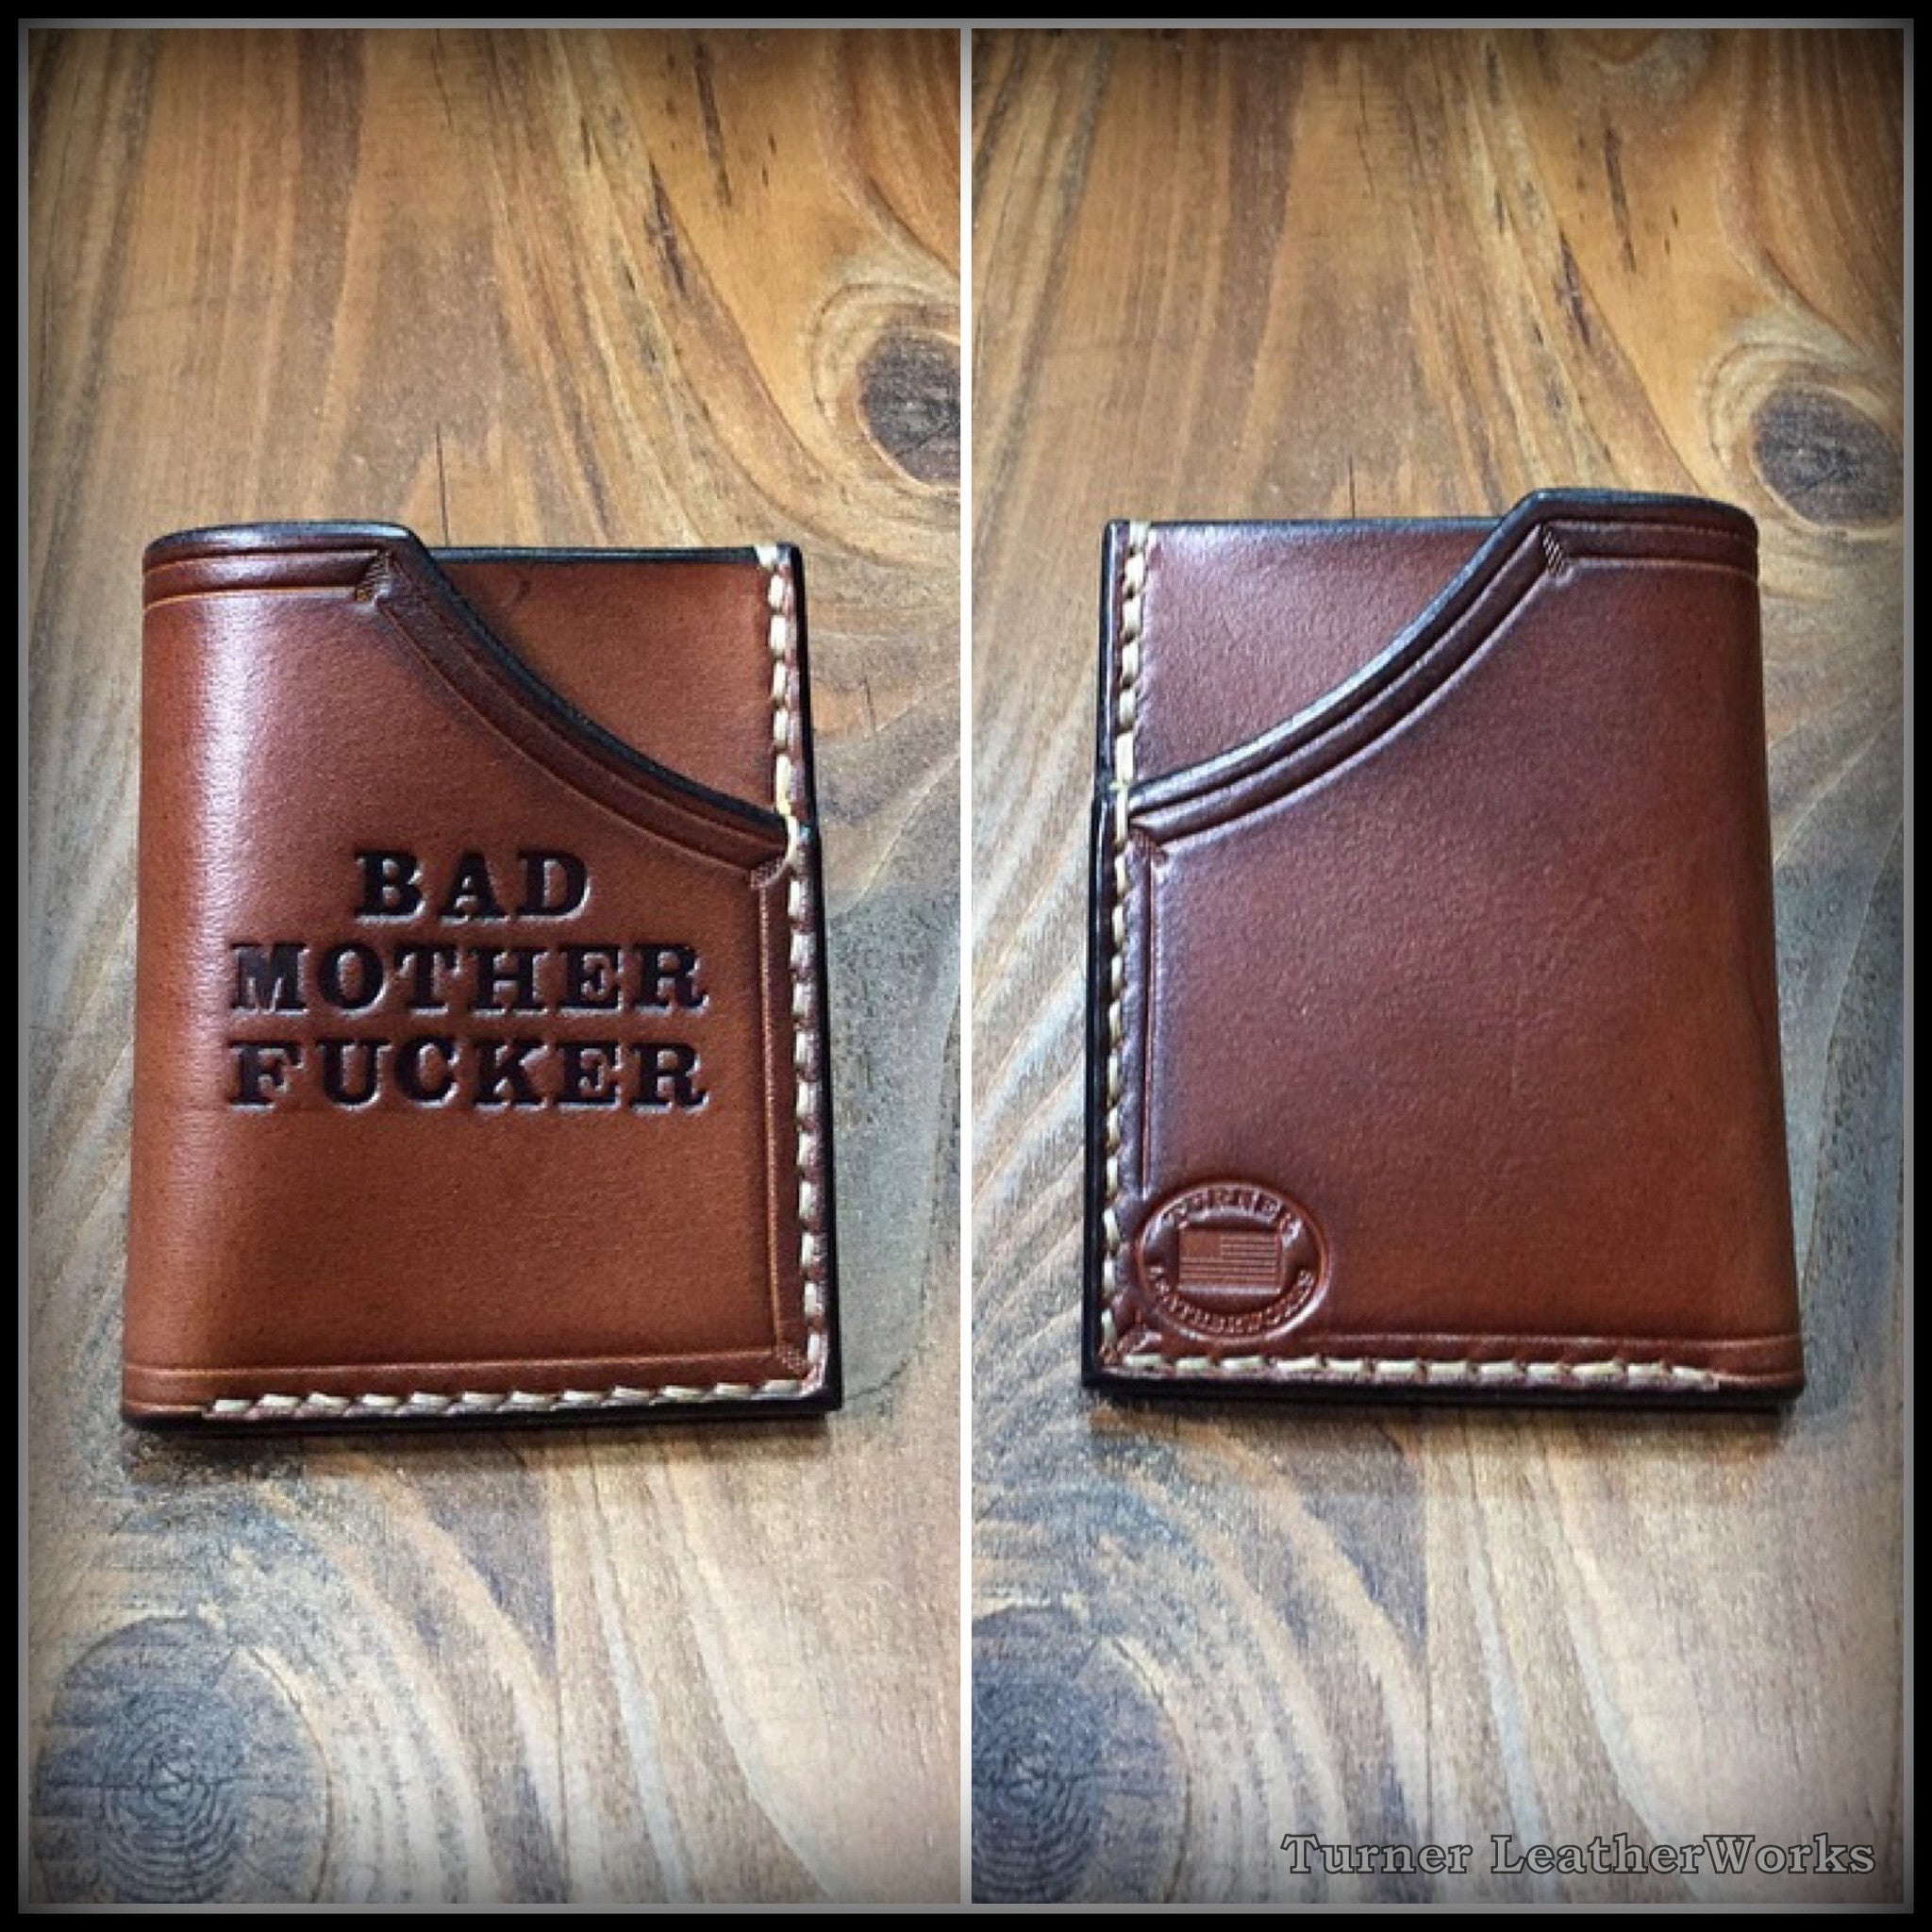 Embroidered Bad Mother Fucker Leather Wallet